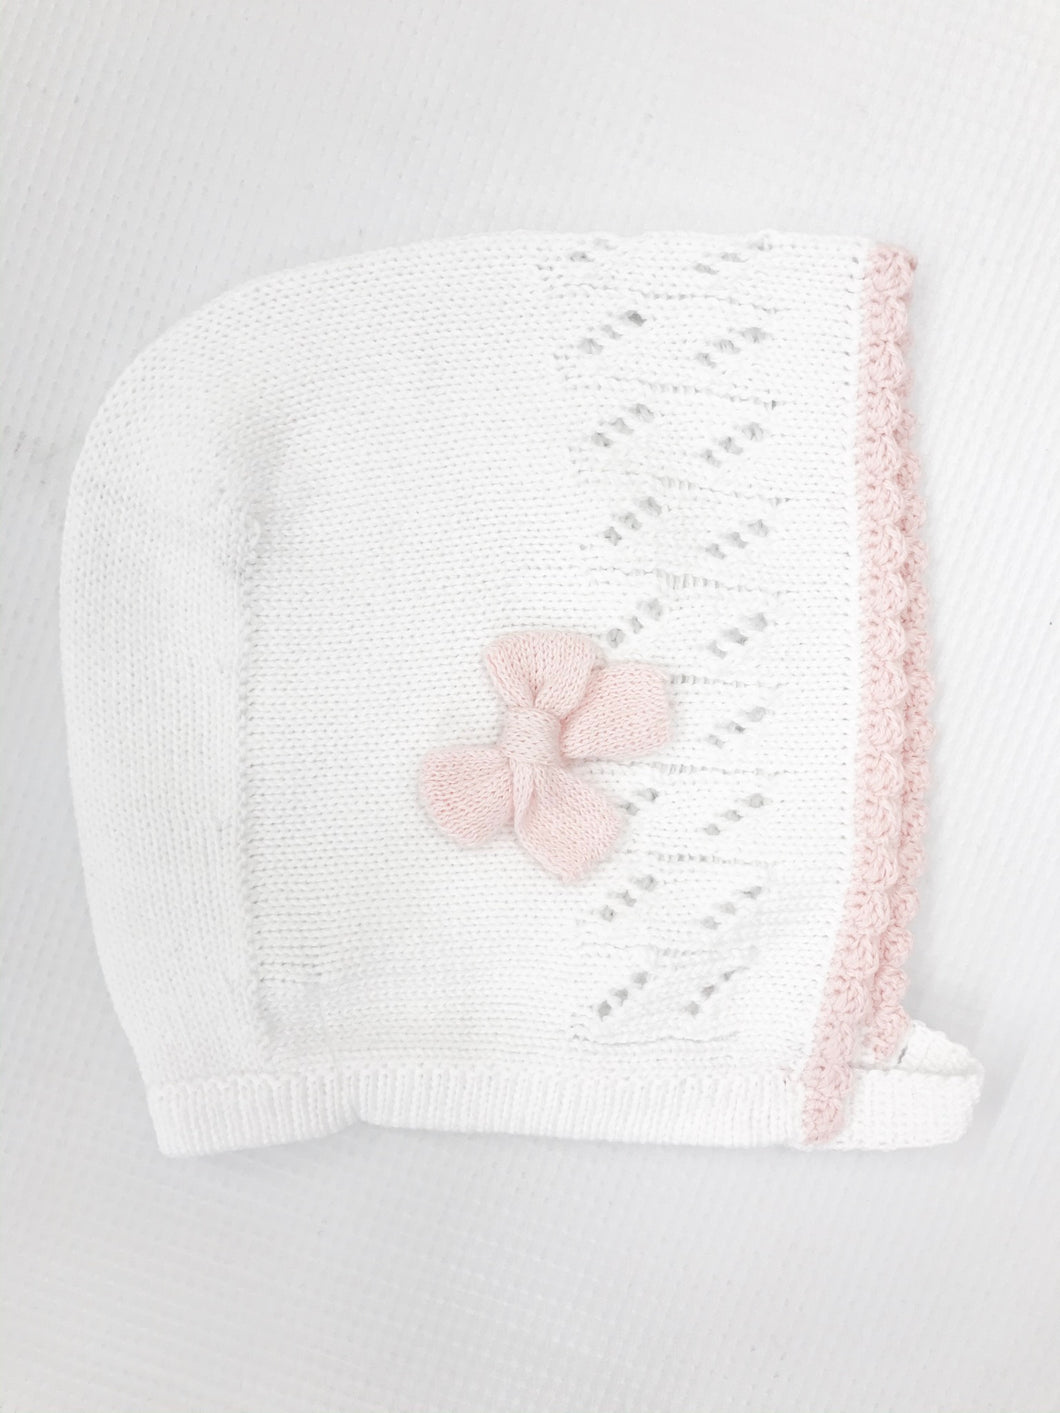 Knitted White/Pink Bonnet